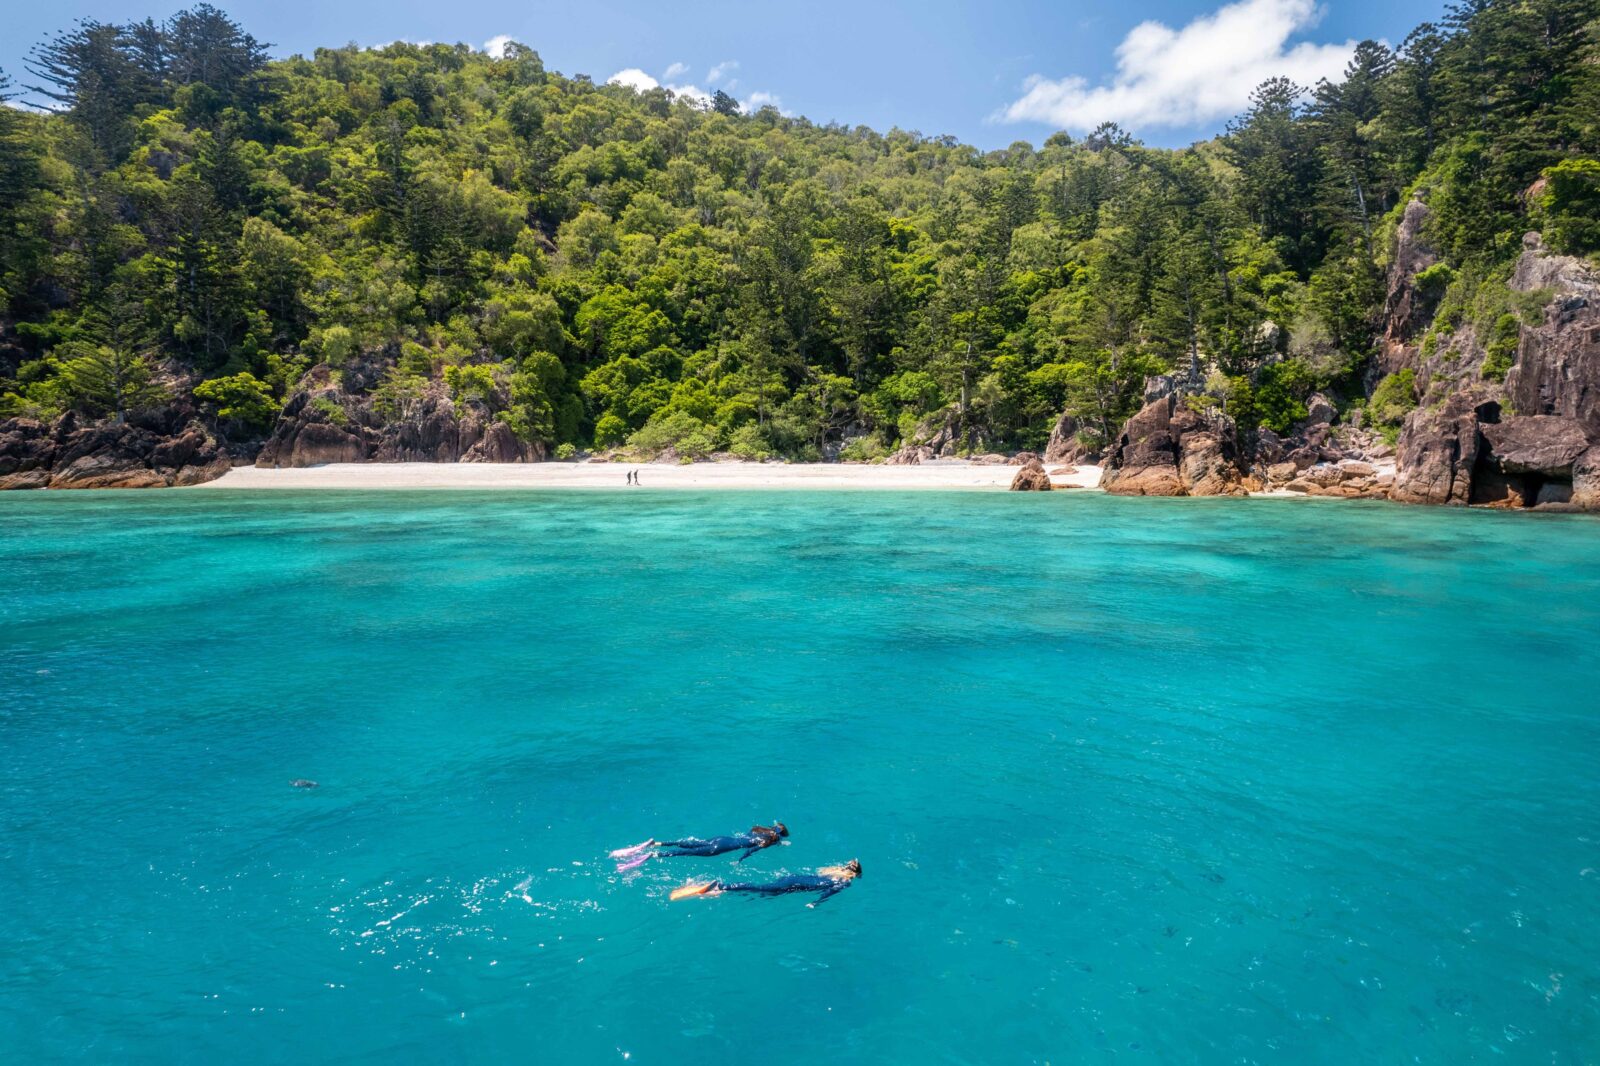 Snorkelling the Whitsunday Islands